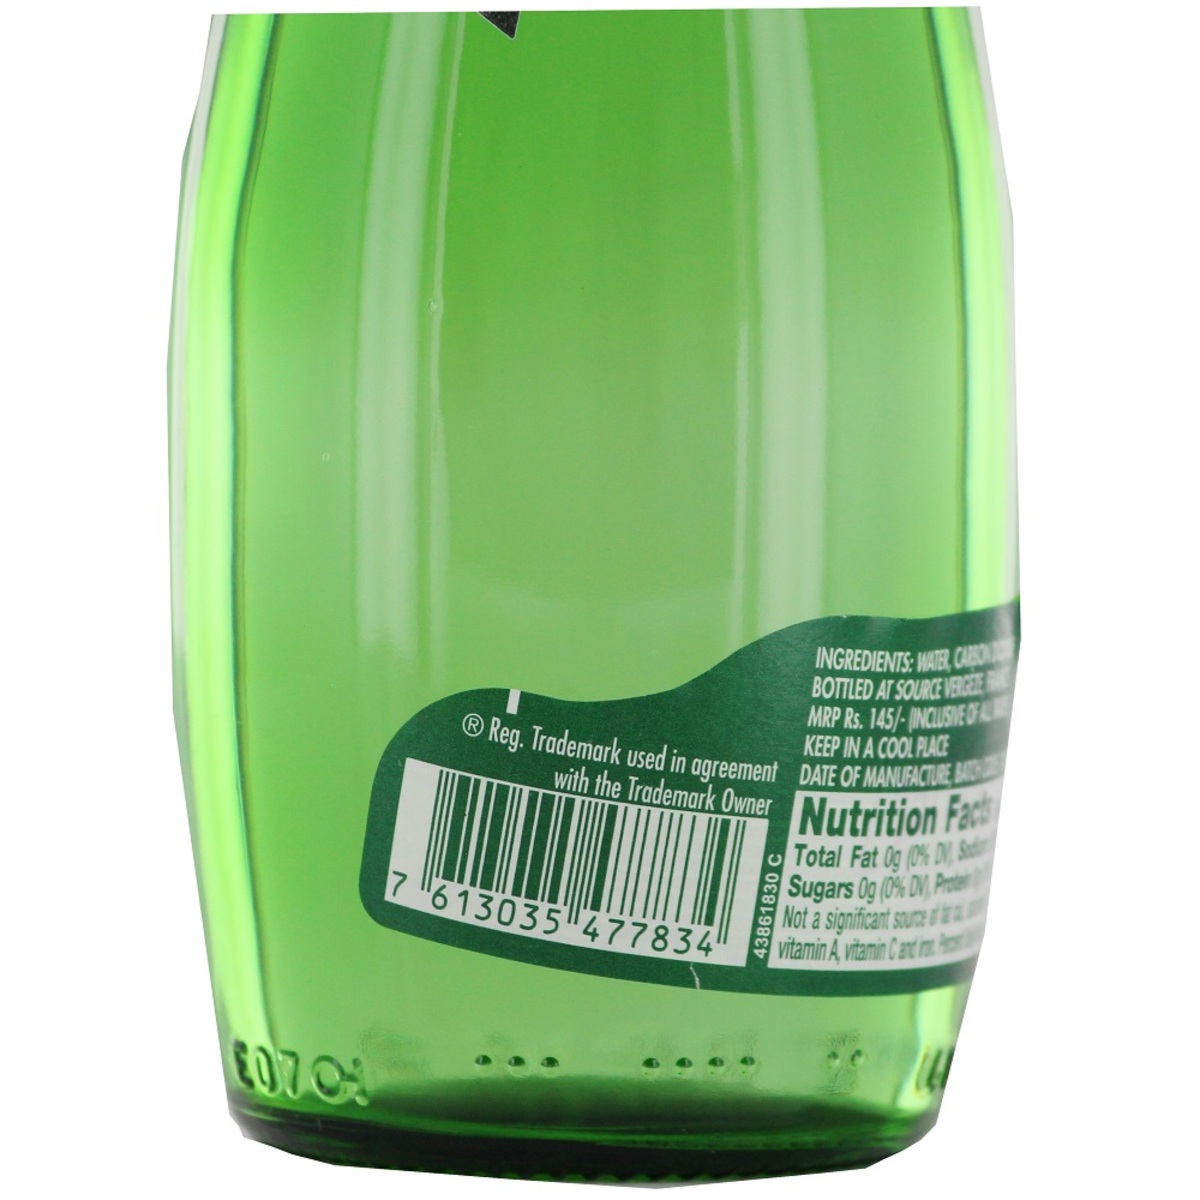 Perrier Sparkling Water 330ml